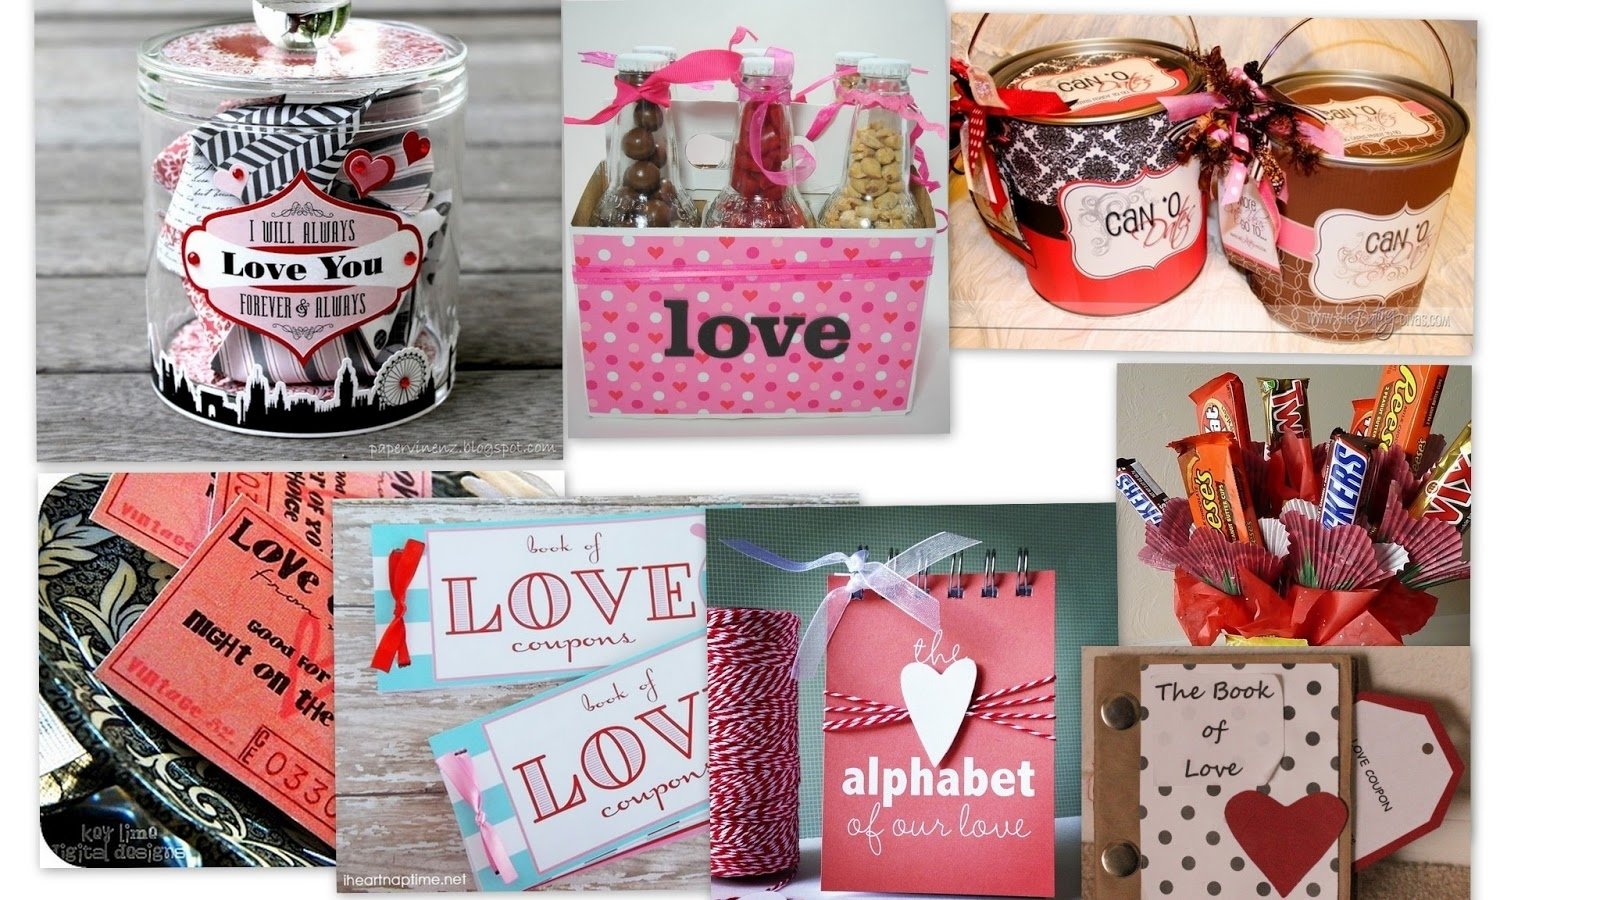 10 Lovable Homemade Valentines Ideas For Him homemade valentines day gift ideas startupcorner co 5 2022